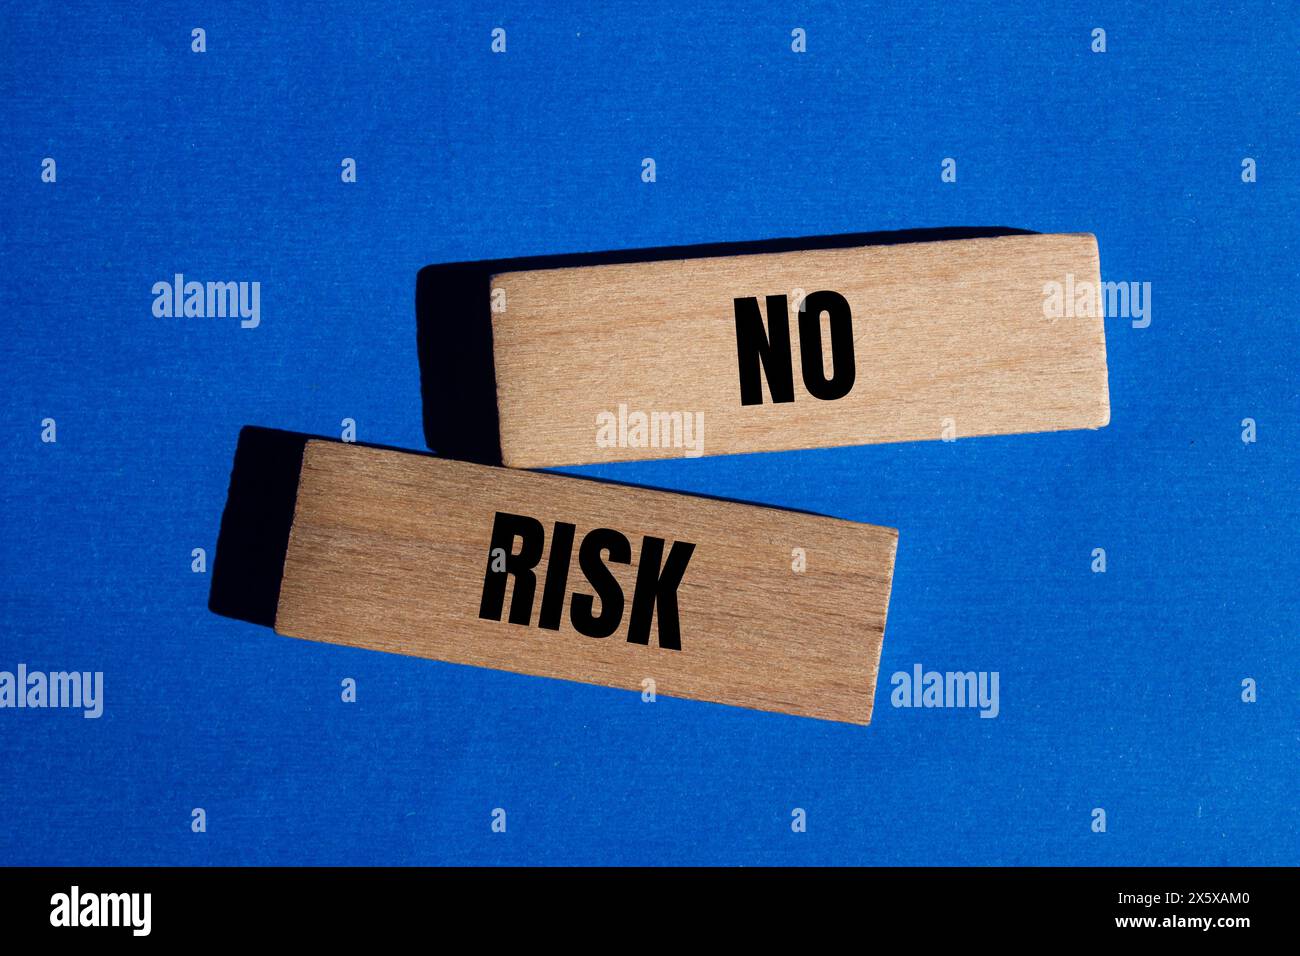 No risk words written on wooden blocks with blue background. Conceptual no risk symbol. Copy space. Stock Photo